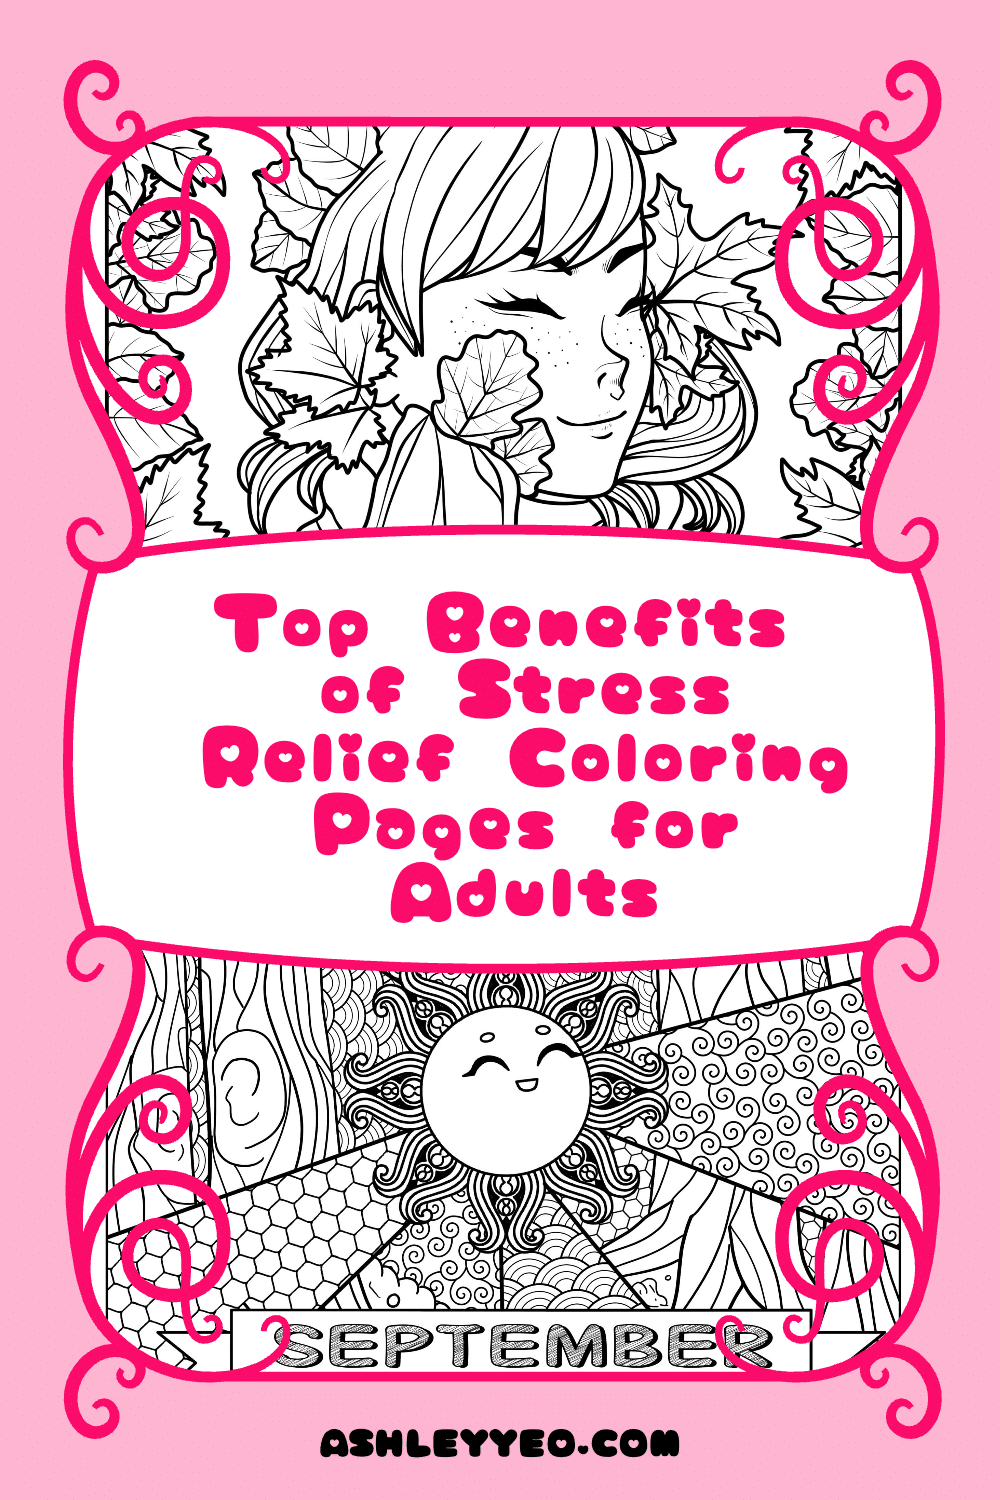 Top 10 Stress Relieving Coloring Books for Adults